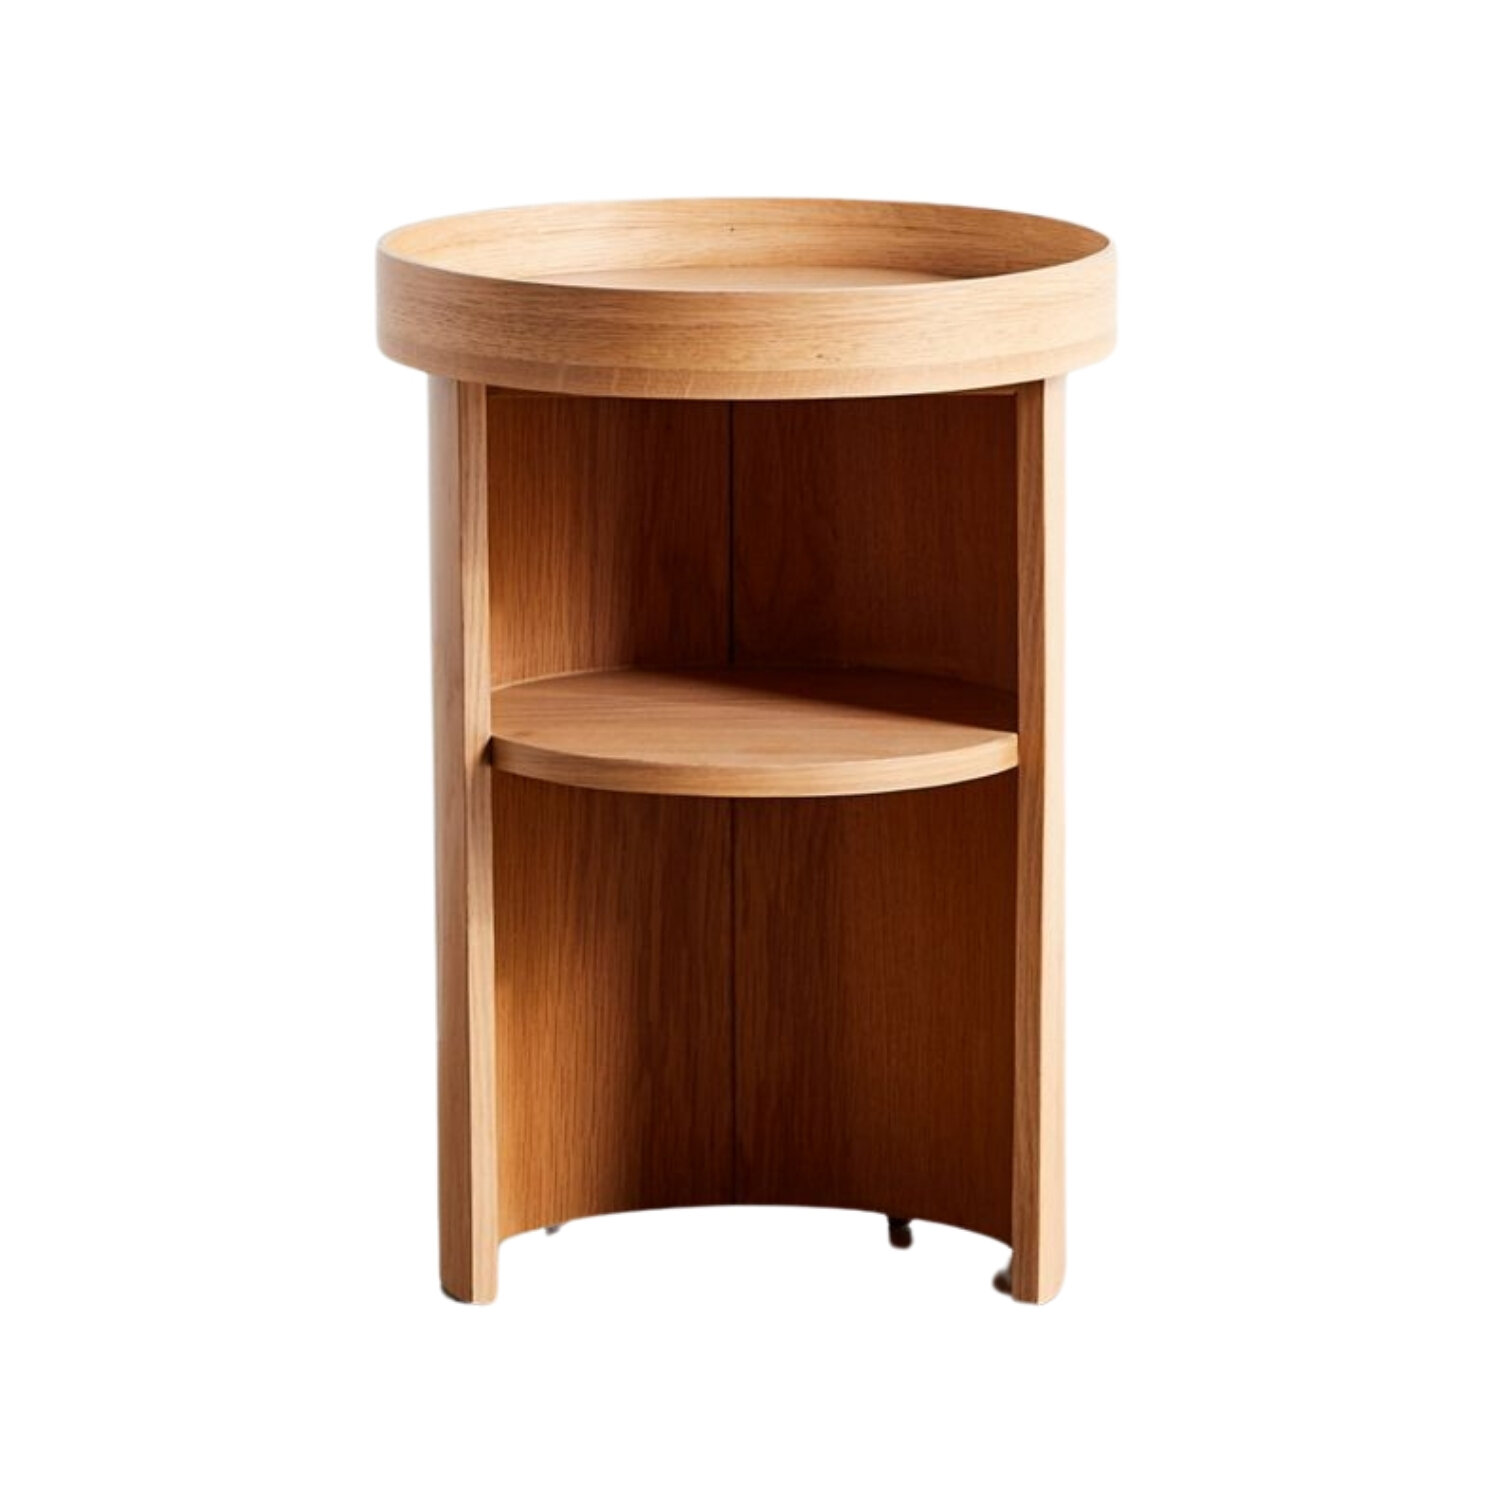 Tabitha Nightstand, Urban Outfitters, $129